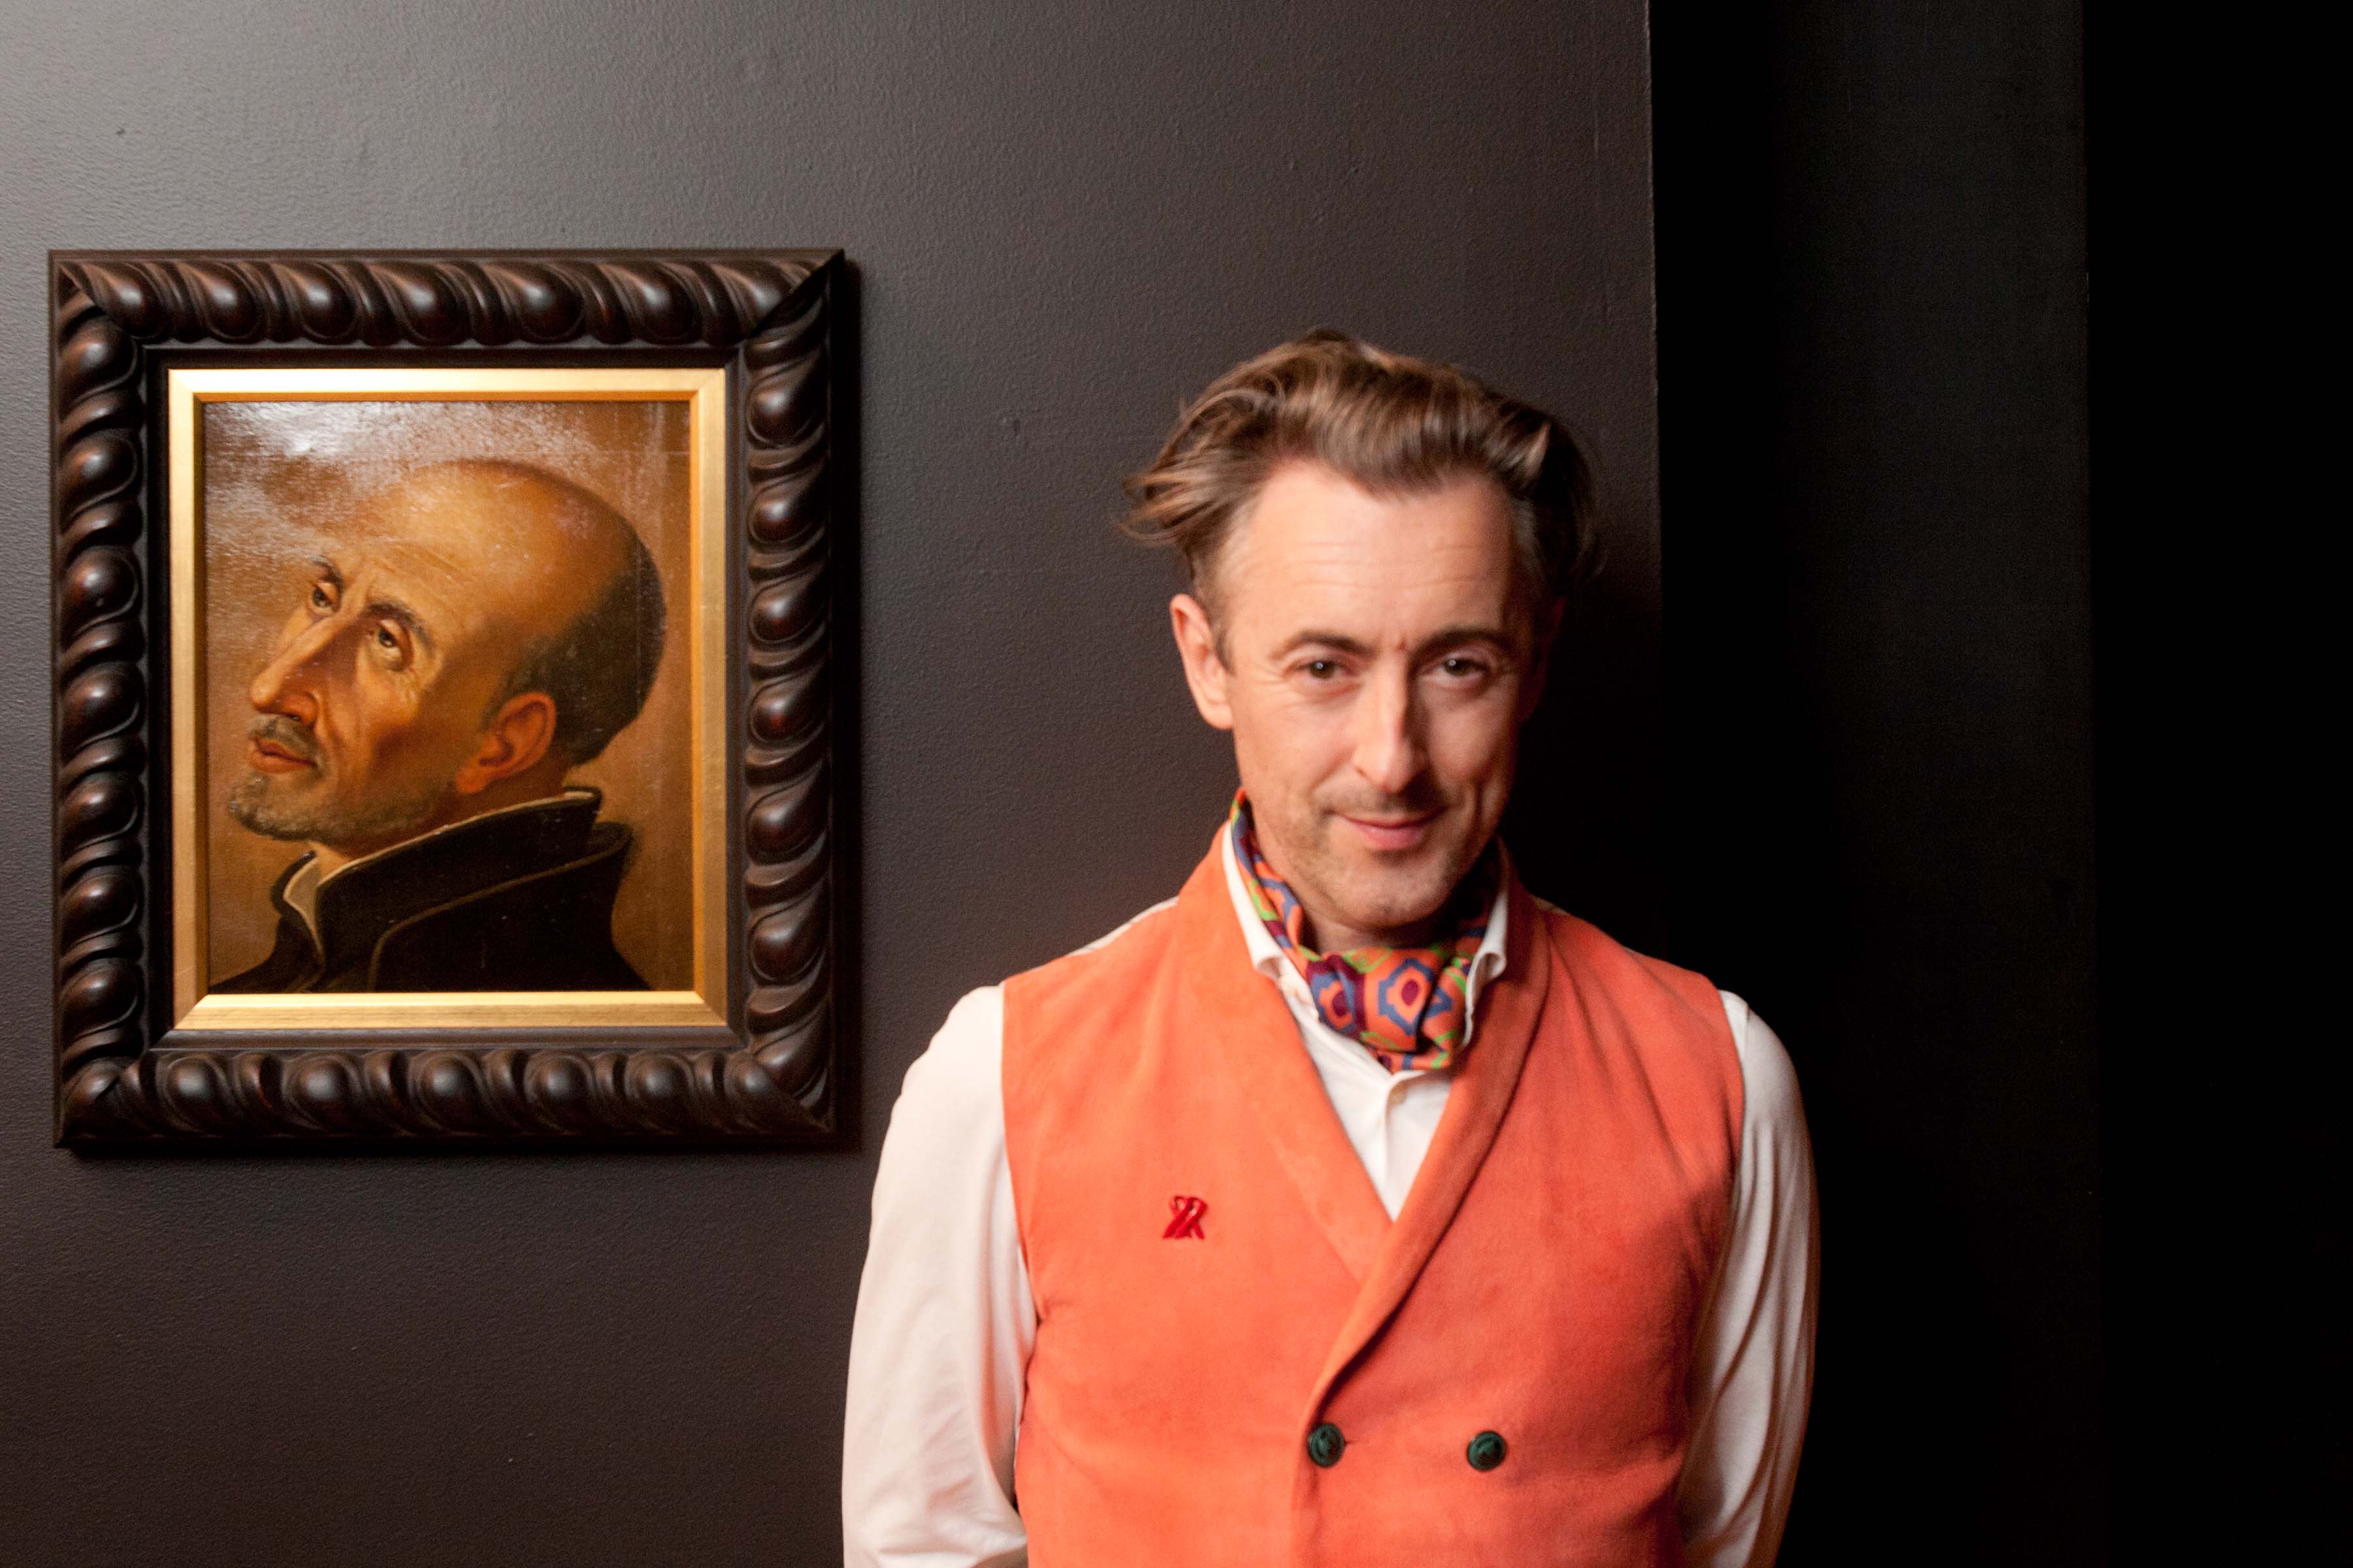 A person in an orange vest and colorful scarf stands next to a framed painting of a bald man with a contemplative expression, set against a dark background.